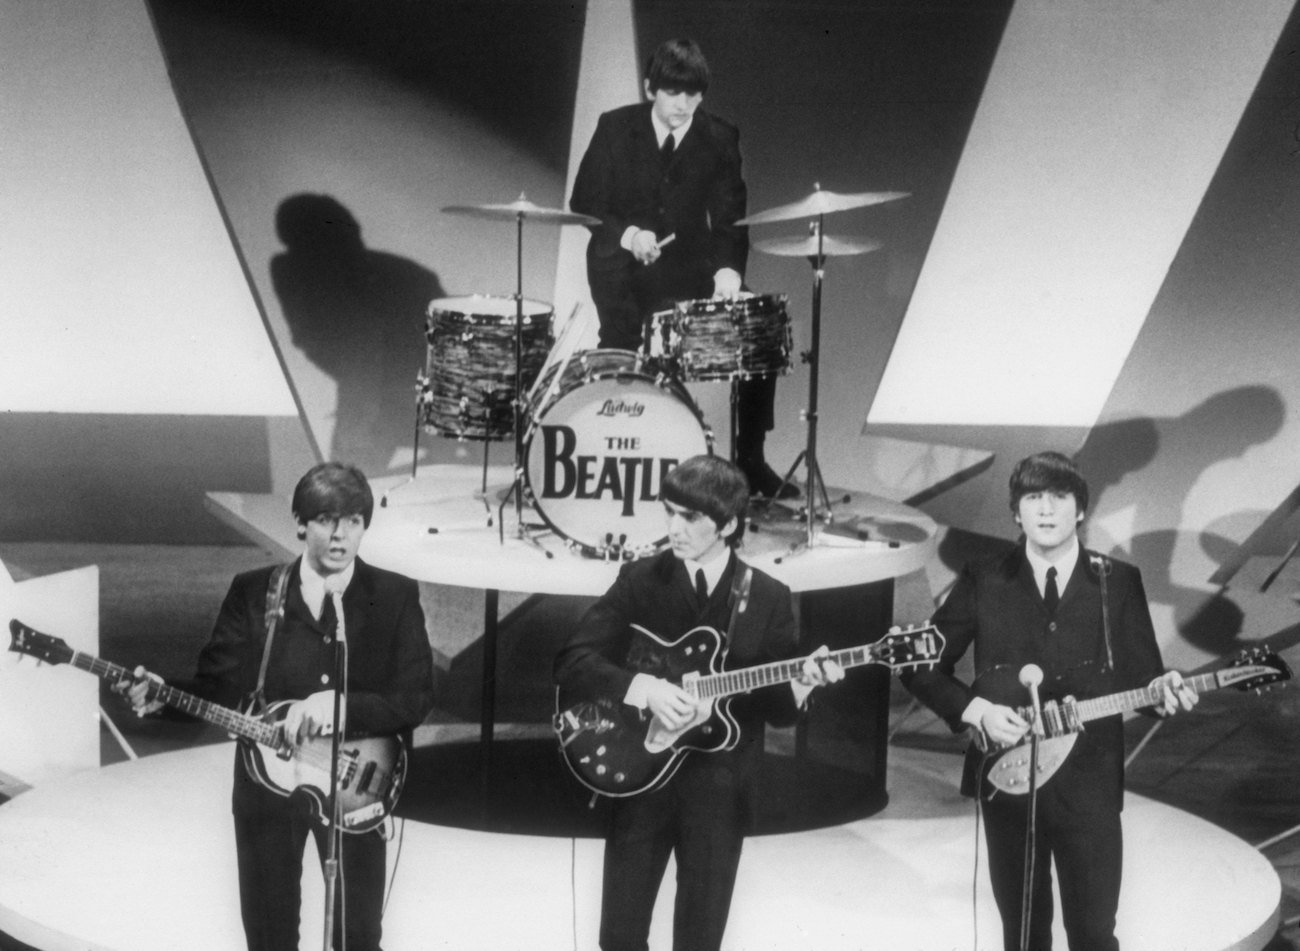 The Beatles performing on 'The Ed Sullivan Show' in 1964.